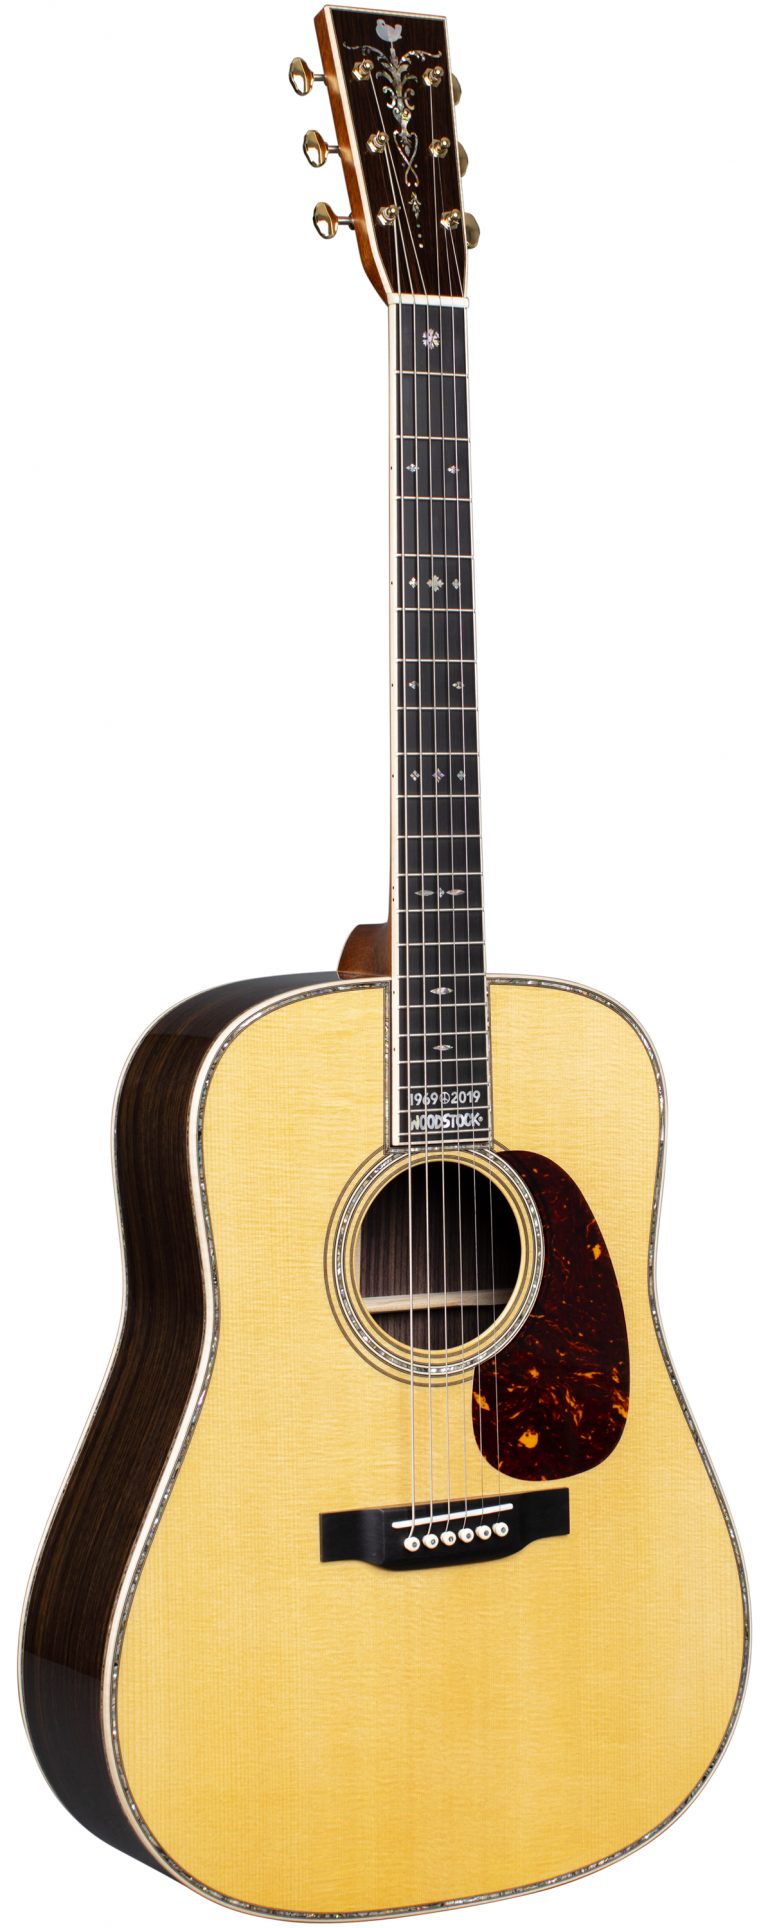 Martin Guitar to Introduce Five New Guitars to Brighten Your Fall Season